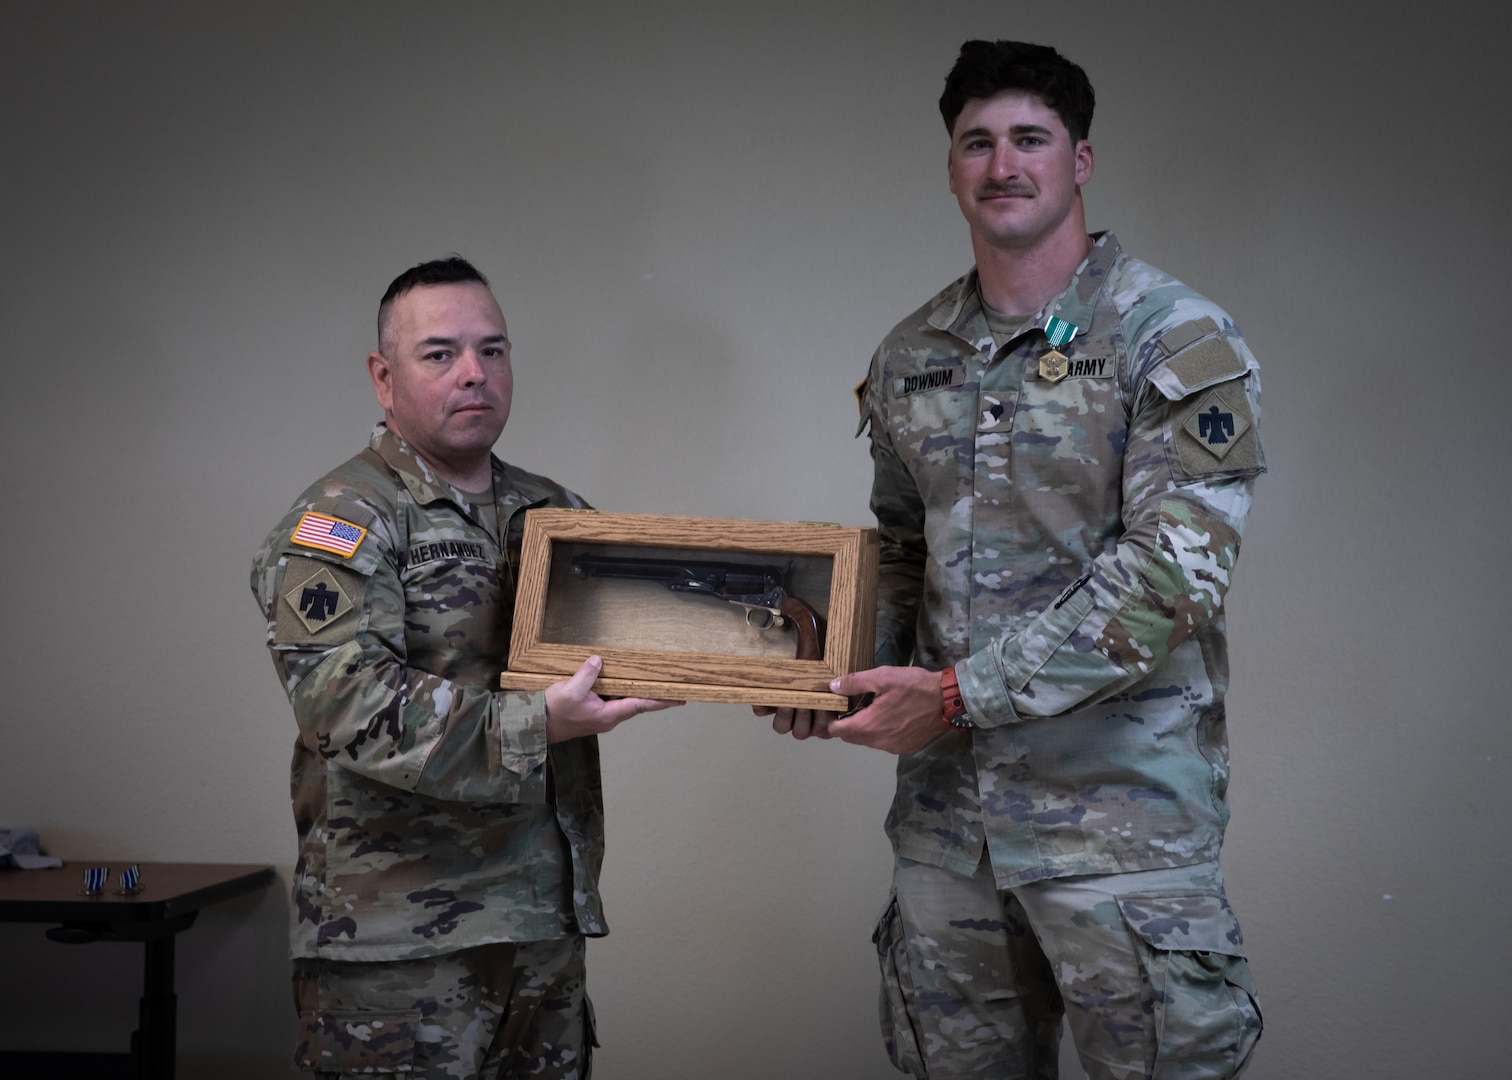 Command Sgt. Major John Hernandez (left), state command sergeant major for Oklahoma, and Spc. Carson Downum, a horizontal construction engineer assigned to the 120th Engineer Battalion, 90th Troop Command, Oklahoma Army National Guard, pose at the awards ceremony for the 2023 Best Warrior Competition, Camp Gruber Training Center, Oklahoma, April 23. The annual competition brings Soldiers together to demonstrate their proficiency in a variety of warrior tasks and drills such as land navigation, marksmanship, an obstacle course, and a 12-mile ruck march, all culminating in an interview with a panel of sergeants major. (Oklahoma National Guard photo by Spc. Danielle Rayon)